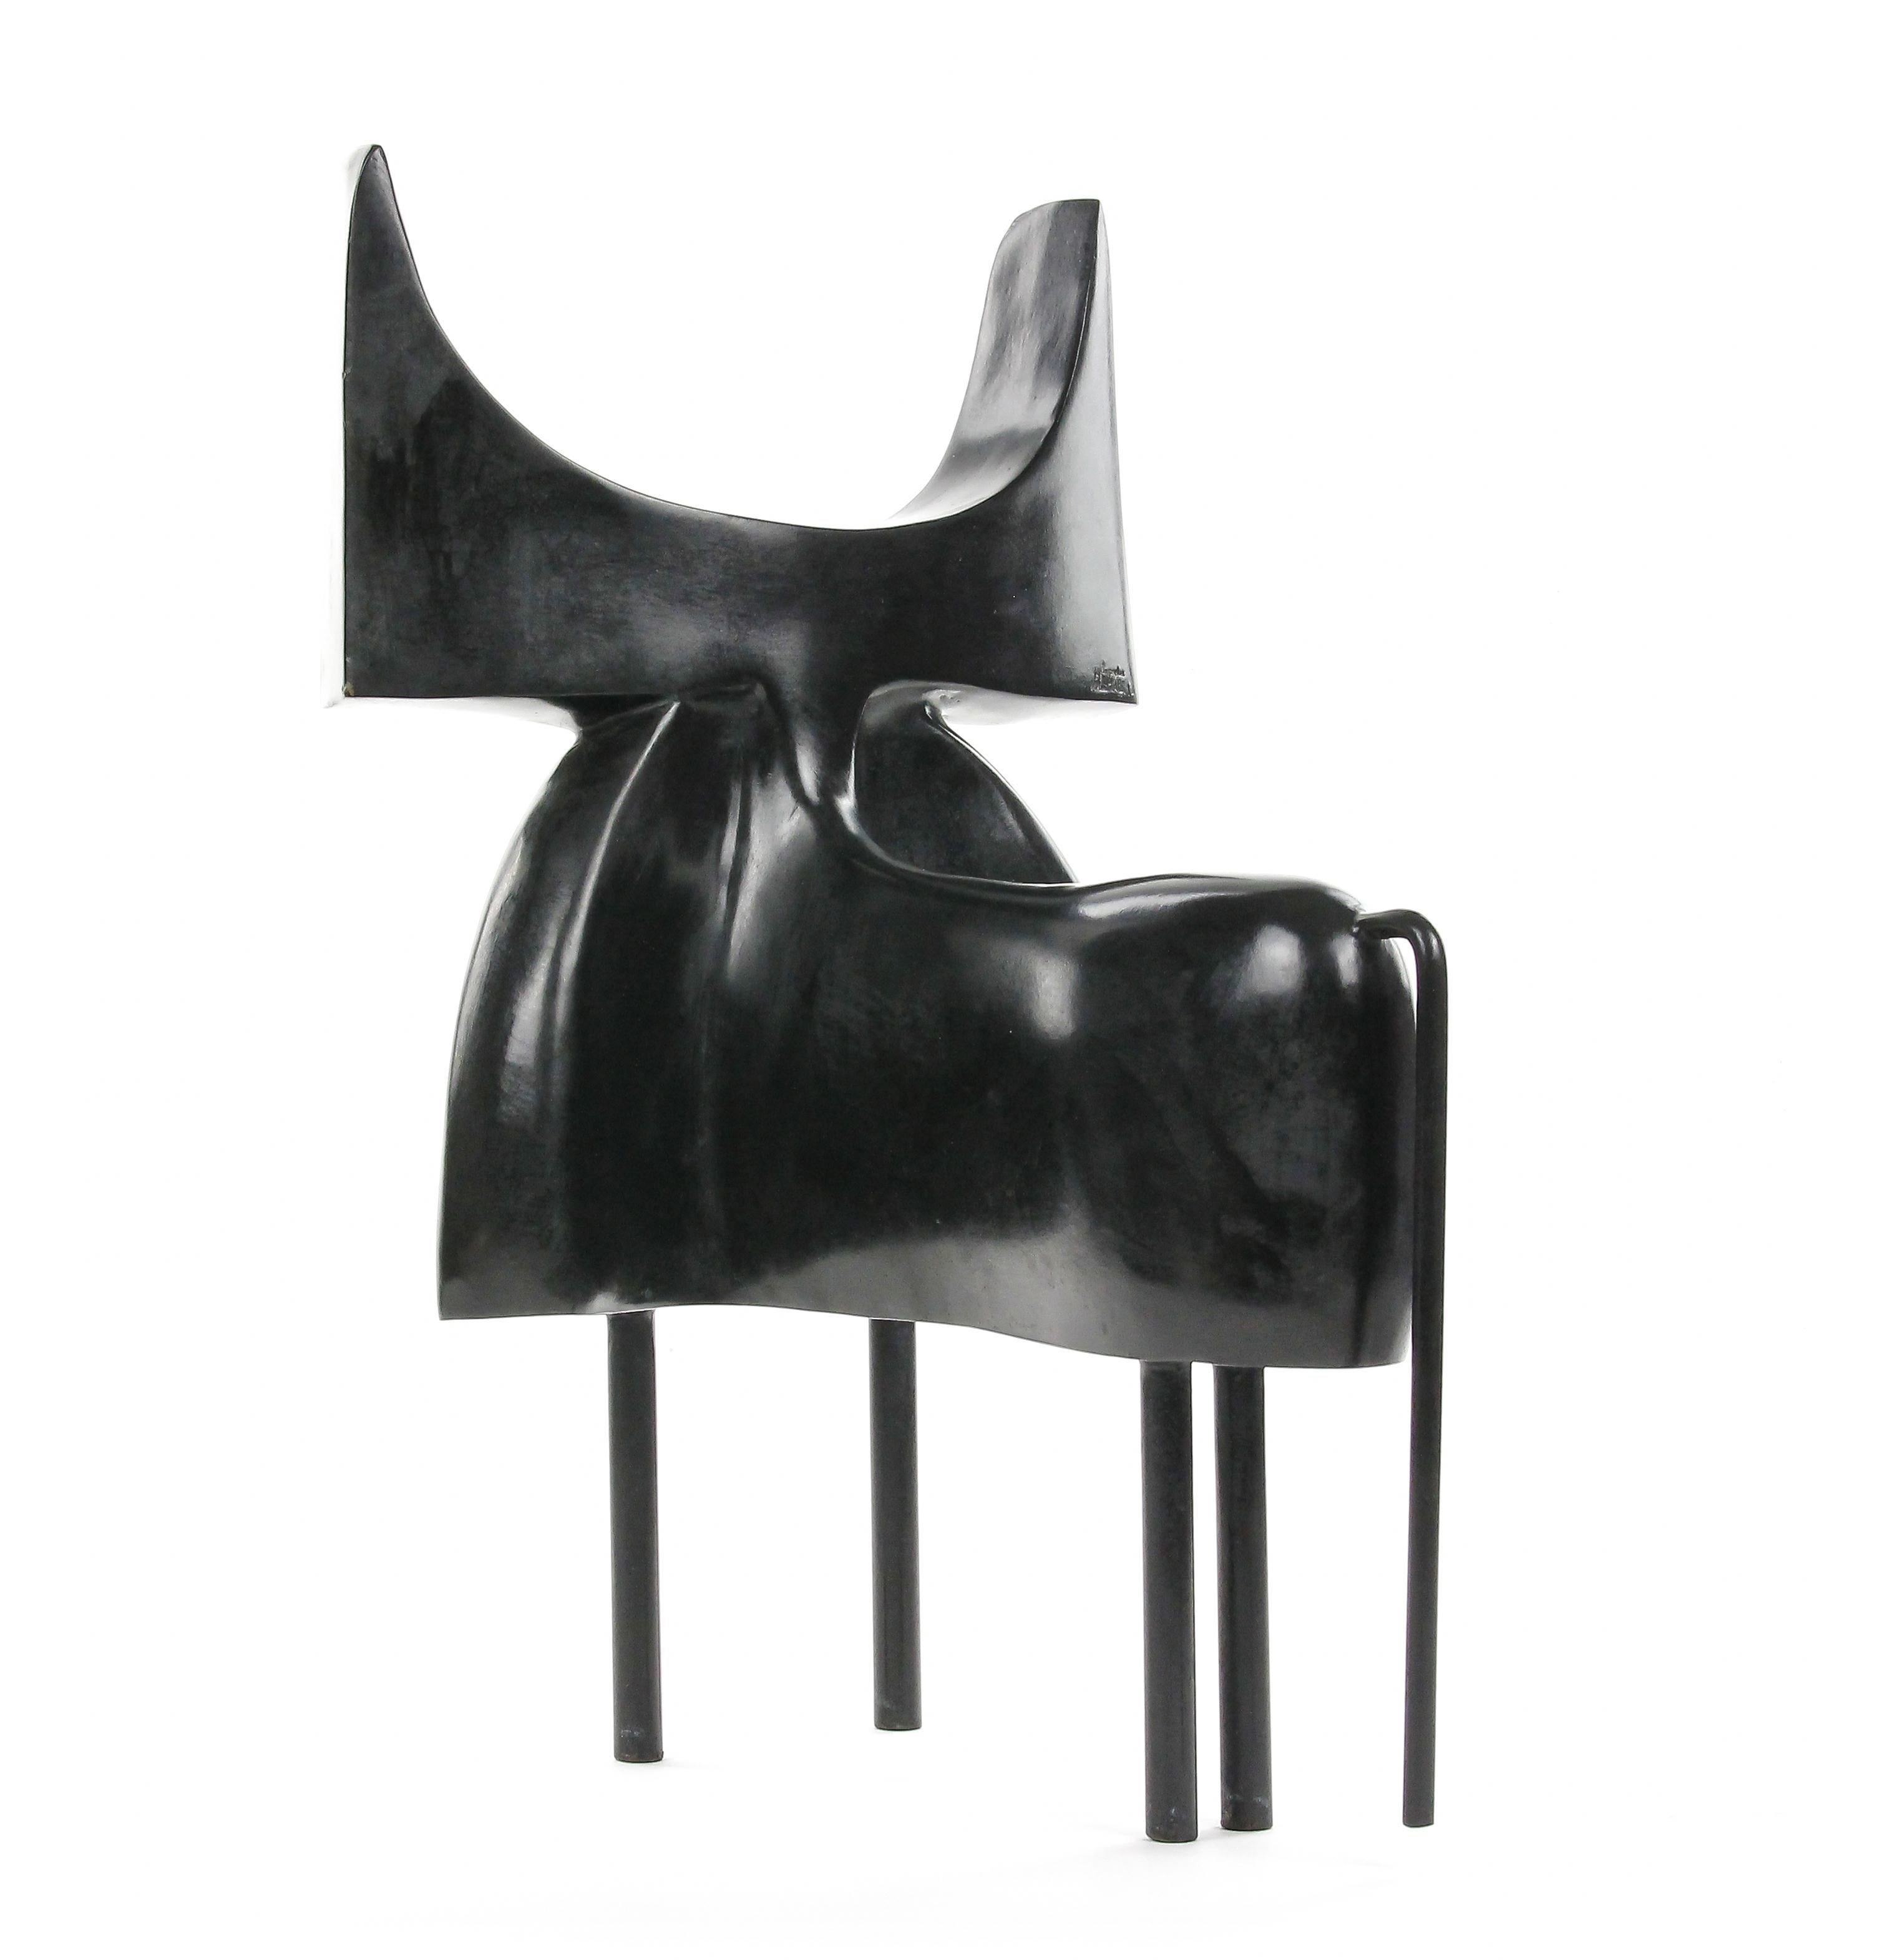 Pablo by Marie Louise Sorbac - Contemporary bronze sculpture, geometric bull For Sale 5